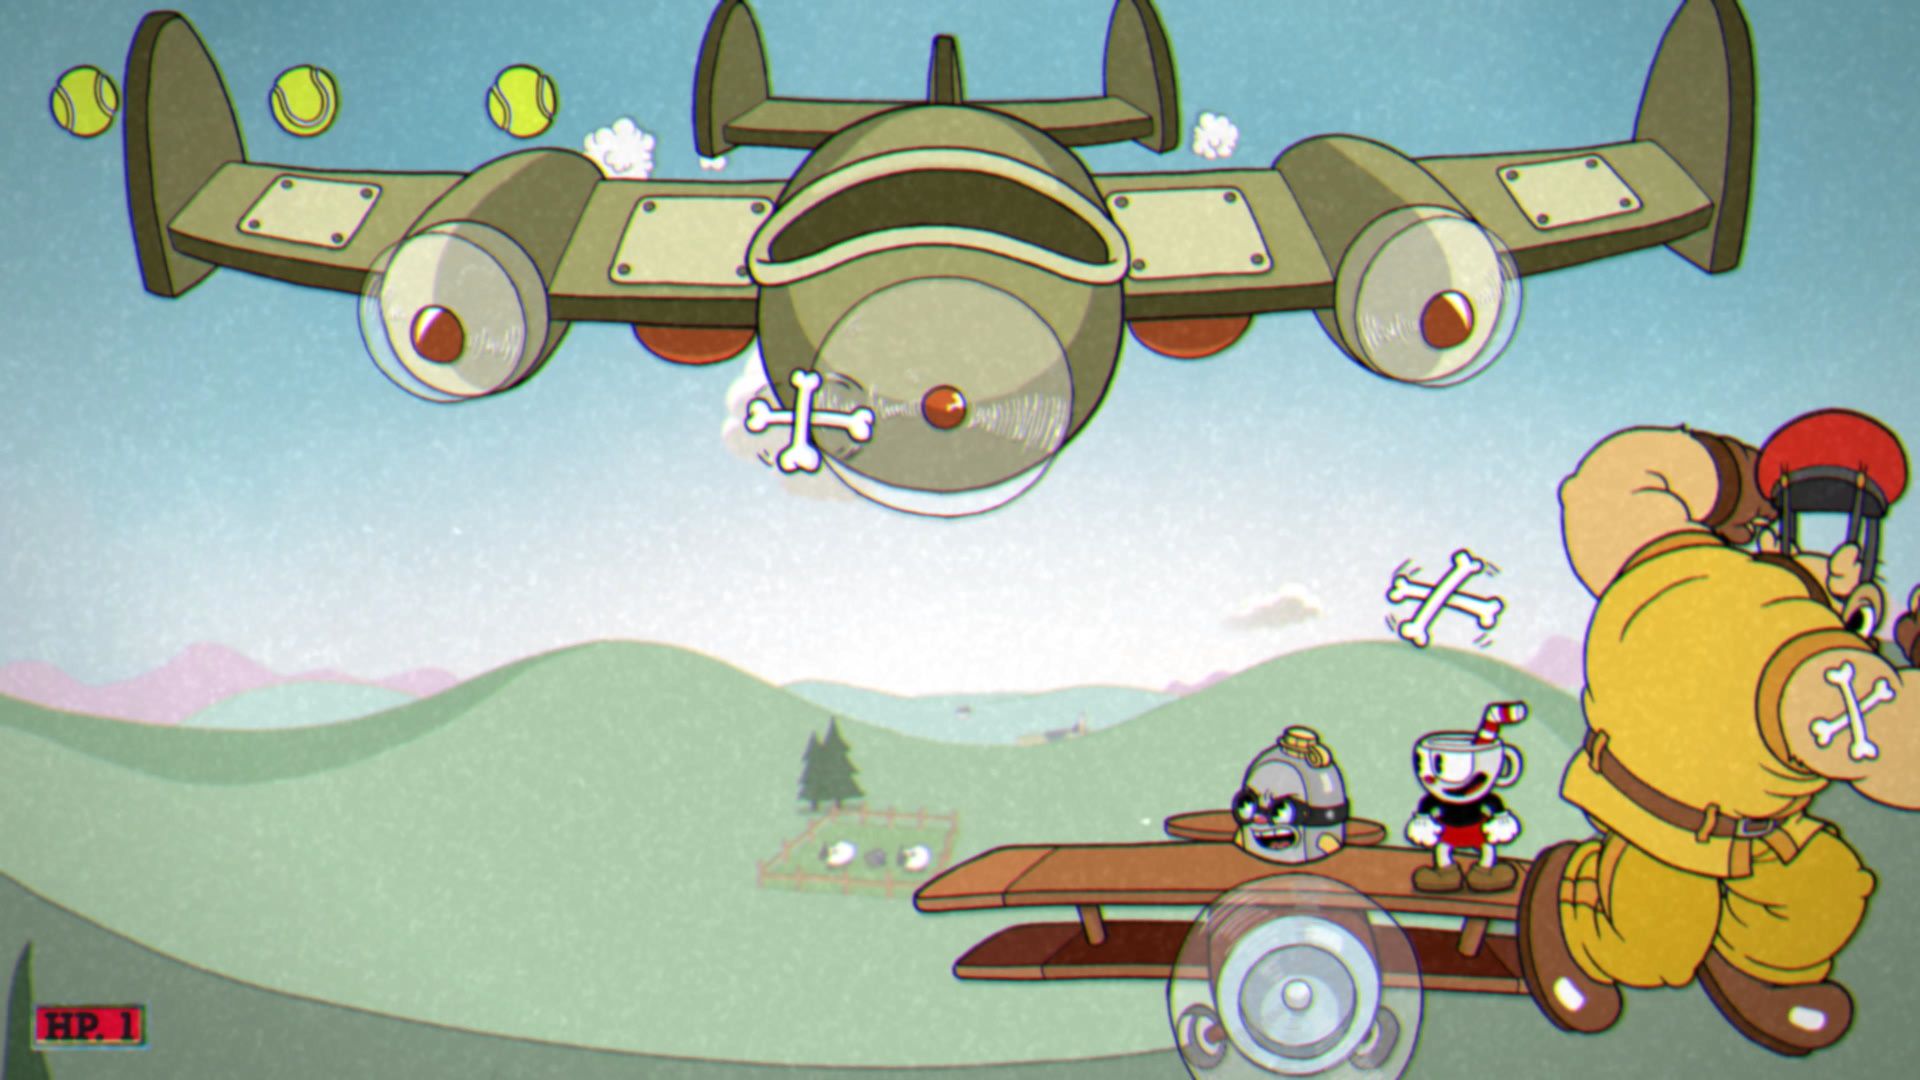 Cuphead The Delicious Course, The Howling Aces, Phase 1, Crossbones using the boomerang attack